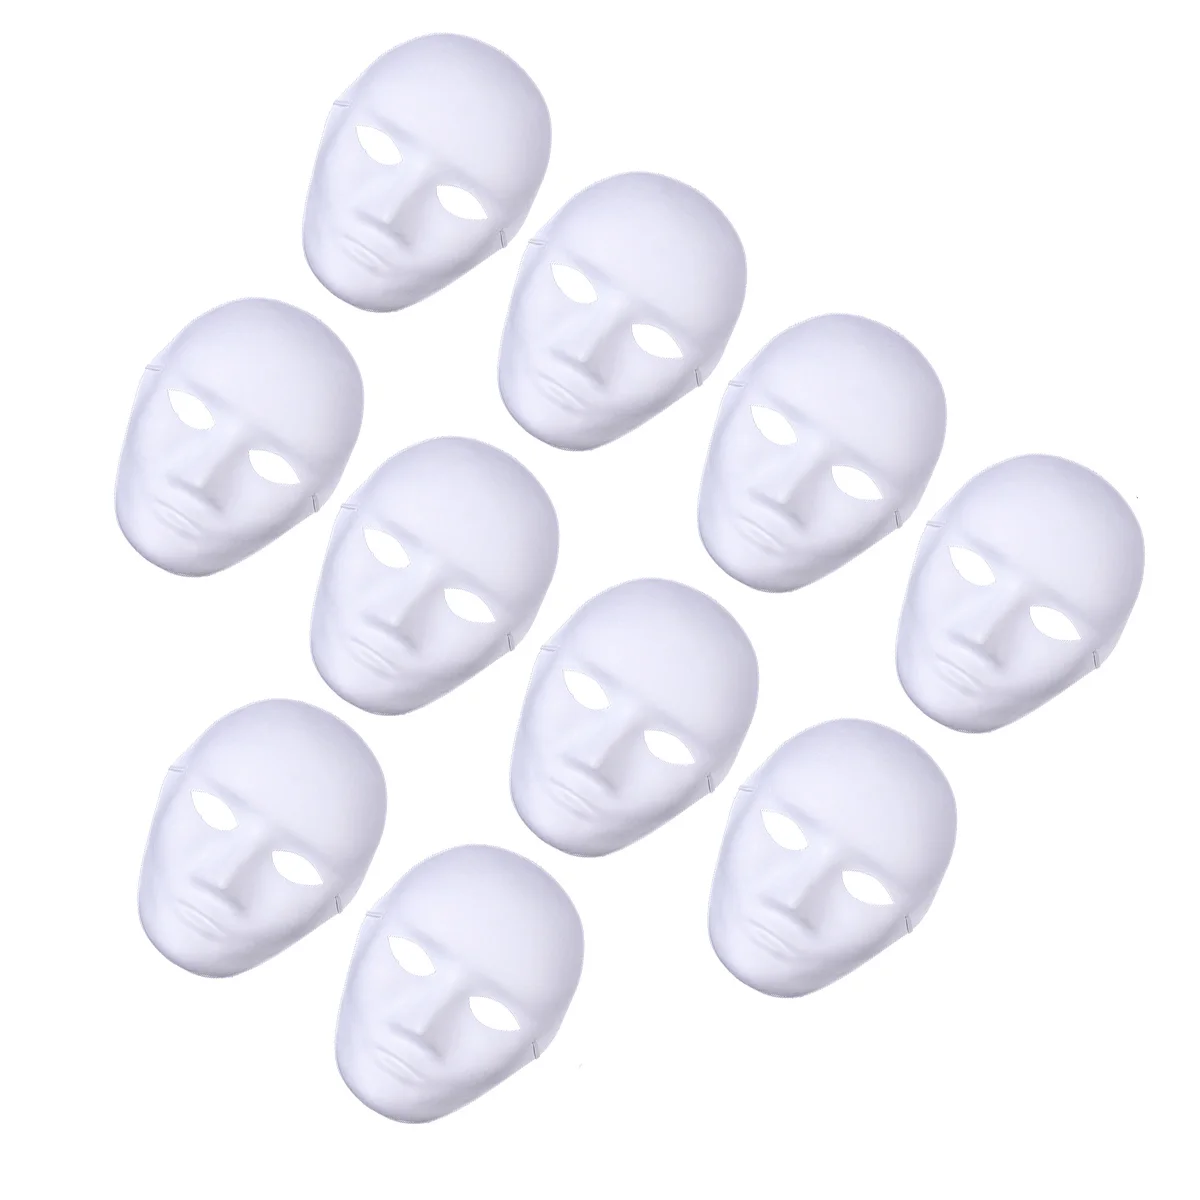 

10/15Pcs White Face Adult Mask Blank Male Female Mask Party white pulp blank Halloween Costume DIY Hand-Painted Unpainted Mask